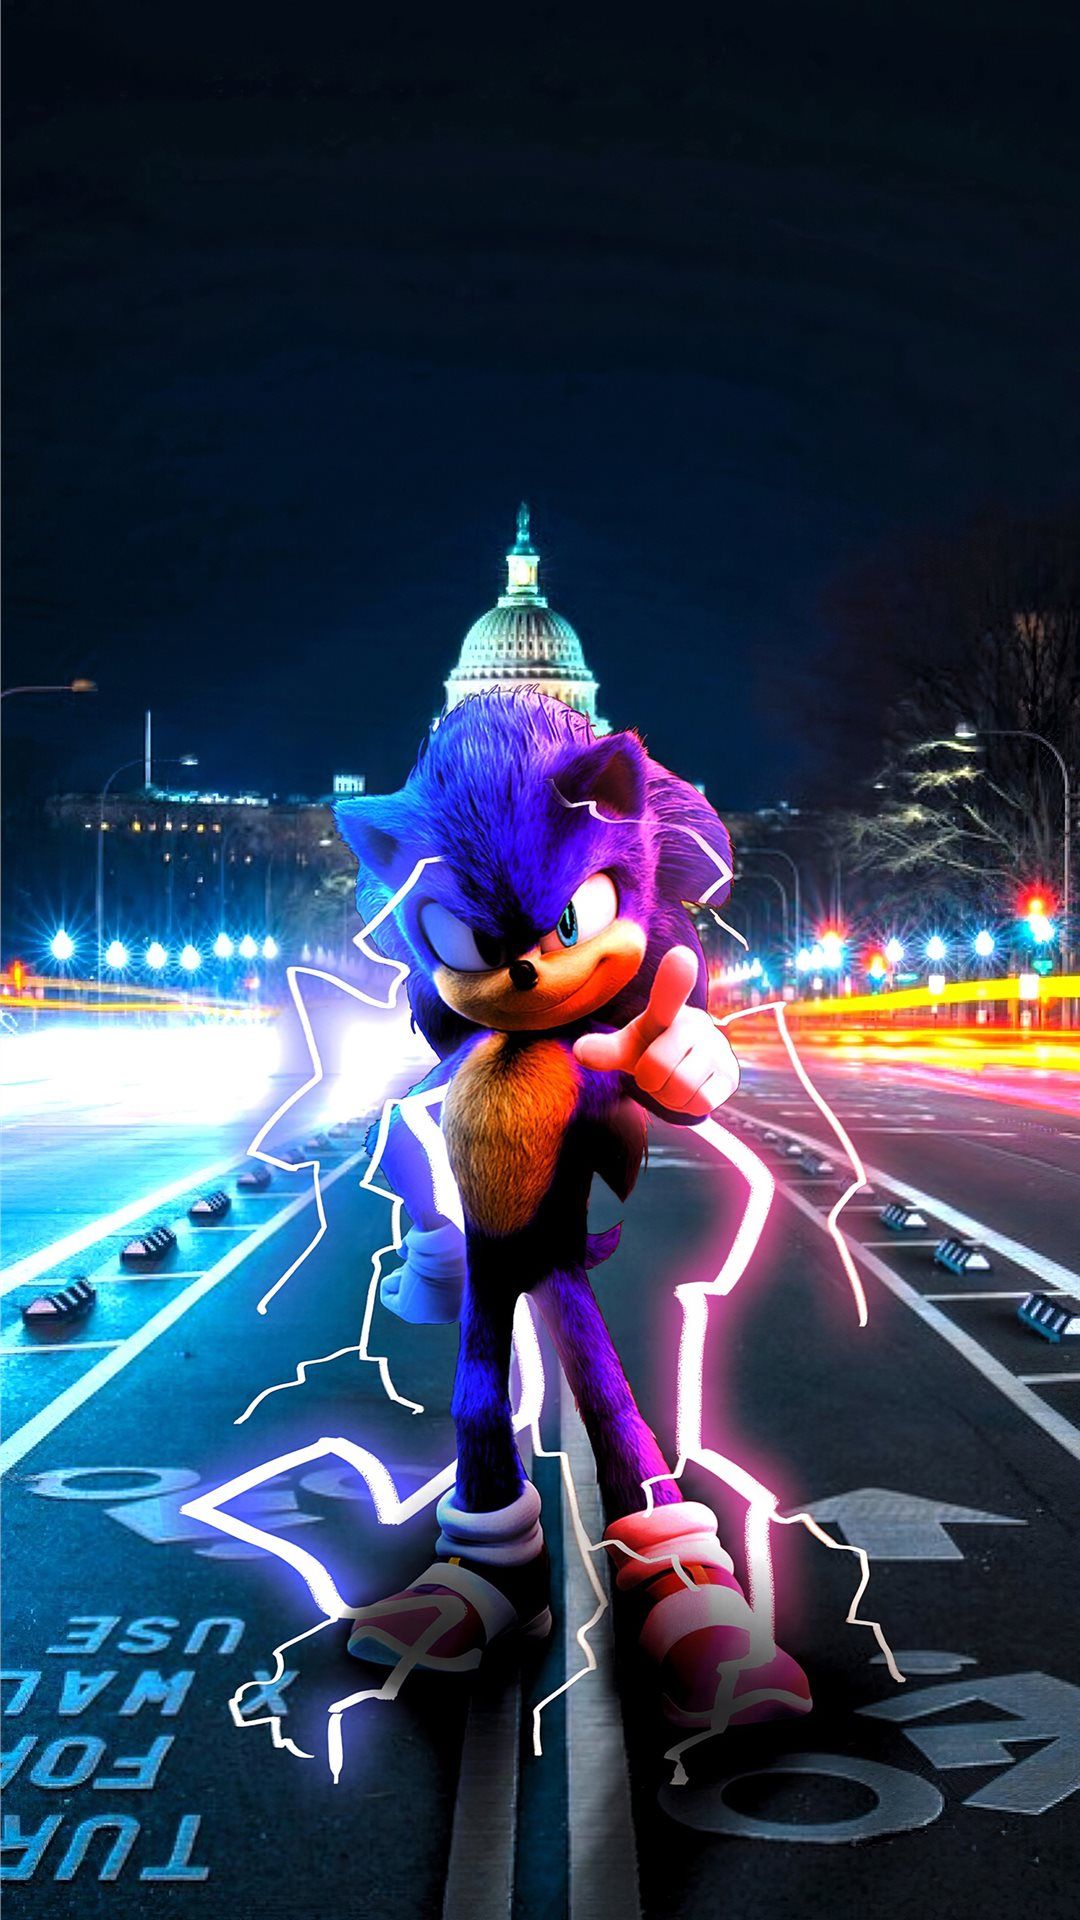 Free download the 2020 sonic the hedgehog4k wallpaper , beaty your iphone. # Sonic The Hedgehog #movies Movies k. Sonic the movie, Sonic adventure, Sonic